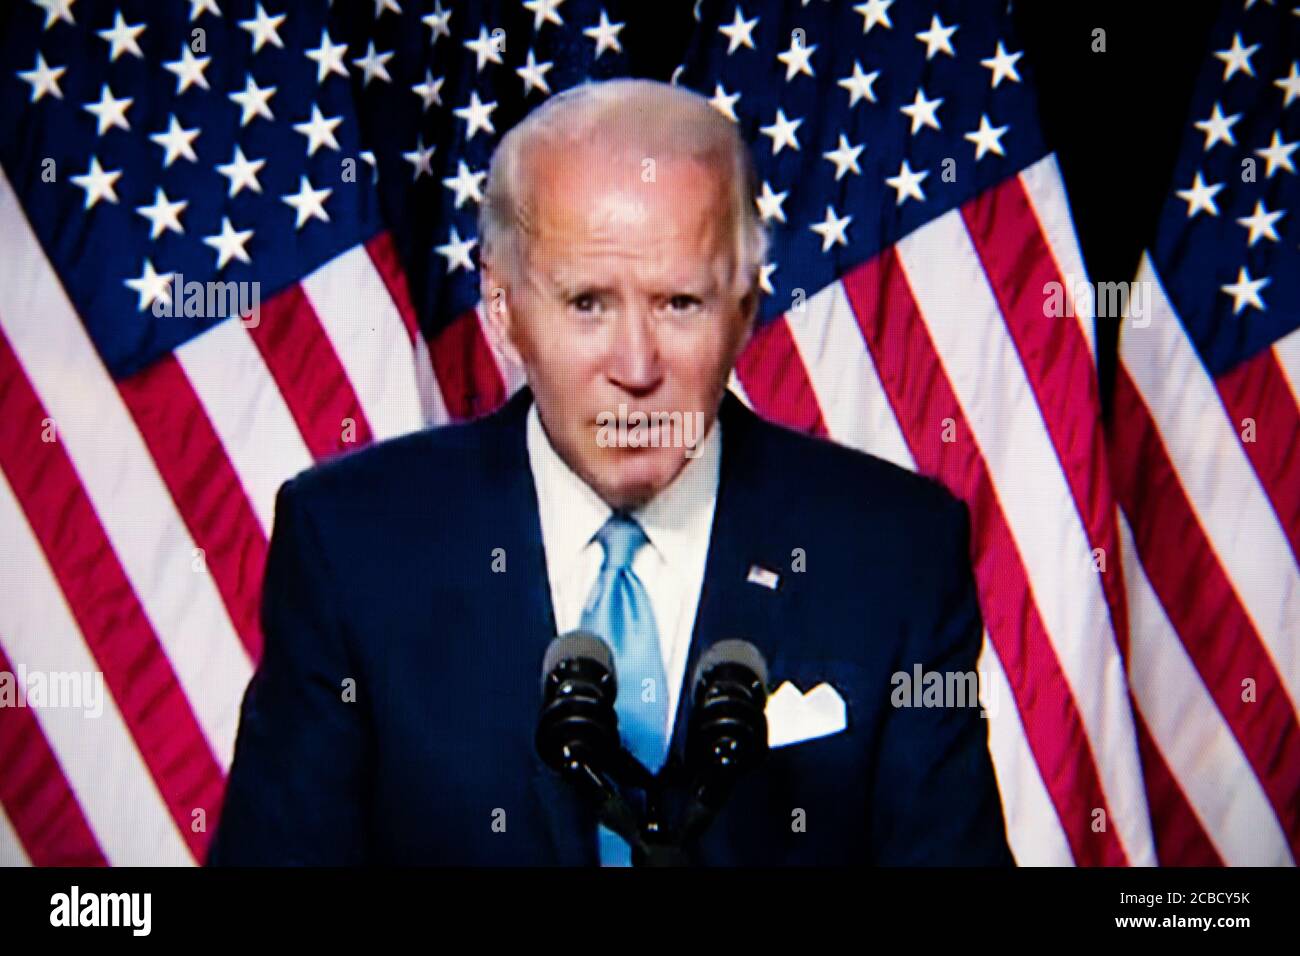 Washington, USA. 12th Aug, 2020. A close-up photo illustration of a laptop computer screen shows presumptive Democratic Nominee for President Joe Biden speaking at a livestream event of the announcement of Sen. Kamala Harris as his Vice Presidential running mate, in Washington, DC, on August 12, 2020 amid the Coronavirus pandemic. Sen. Harris is the first woman of color running for Vice President on a major party ticket. (Graeme Sloan/Sipa USA) Credit: Sipa USA/Alamy Live News Stock Photo